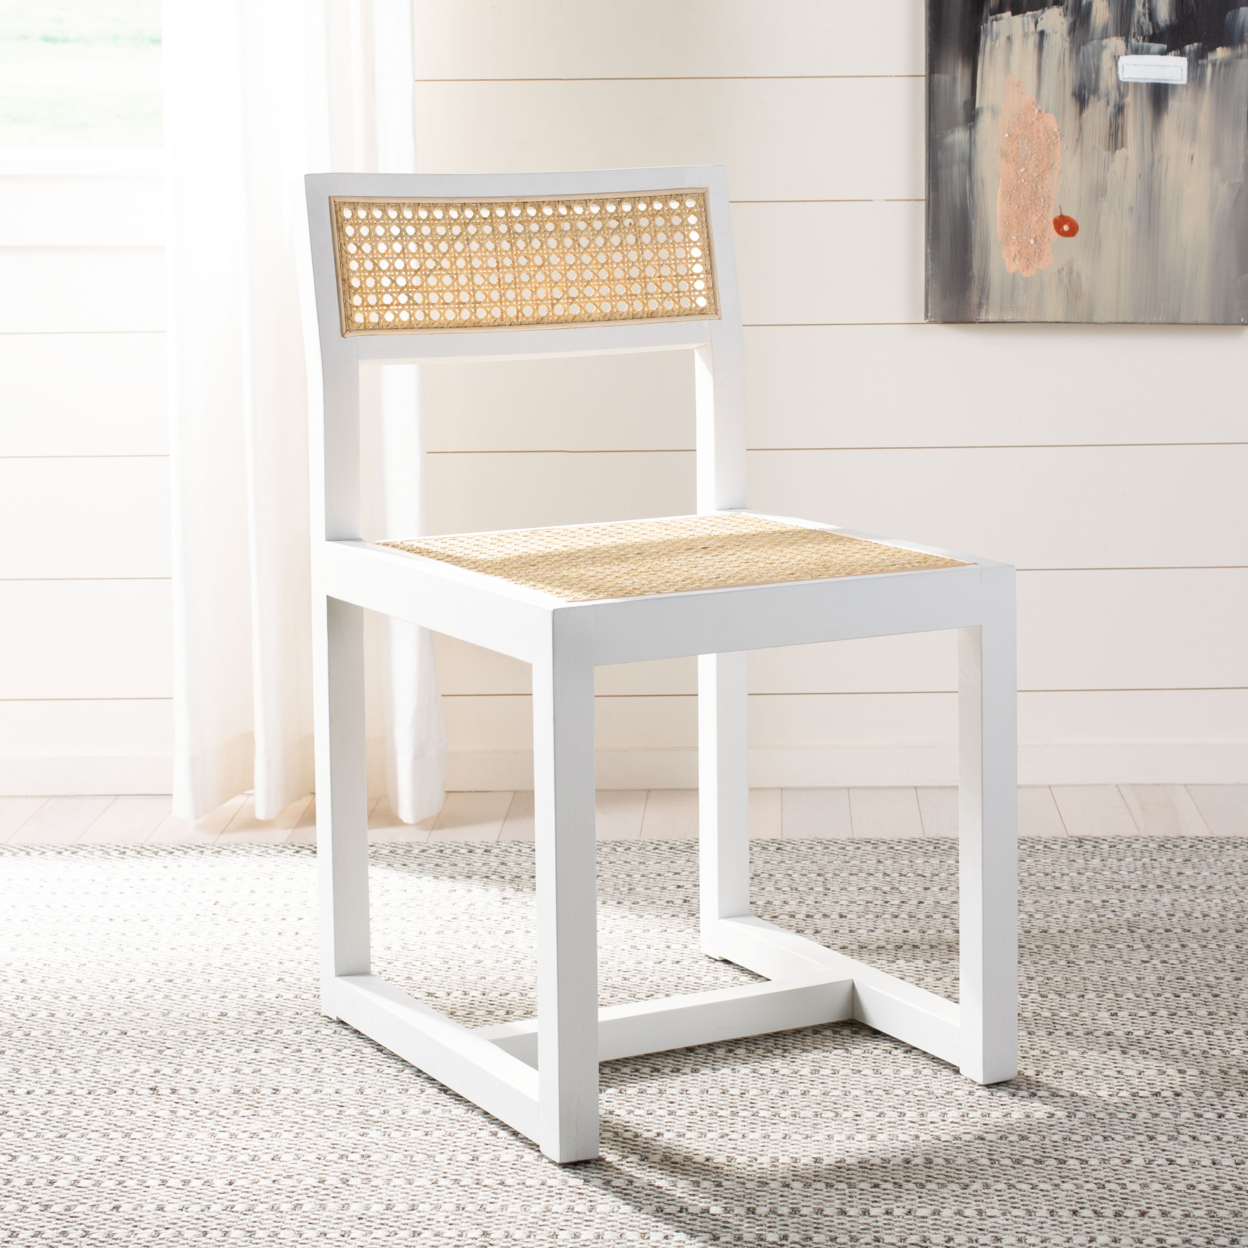 SAFAVIEH Bernice Cane Dining Chair White / Natural